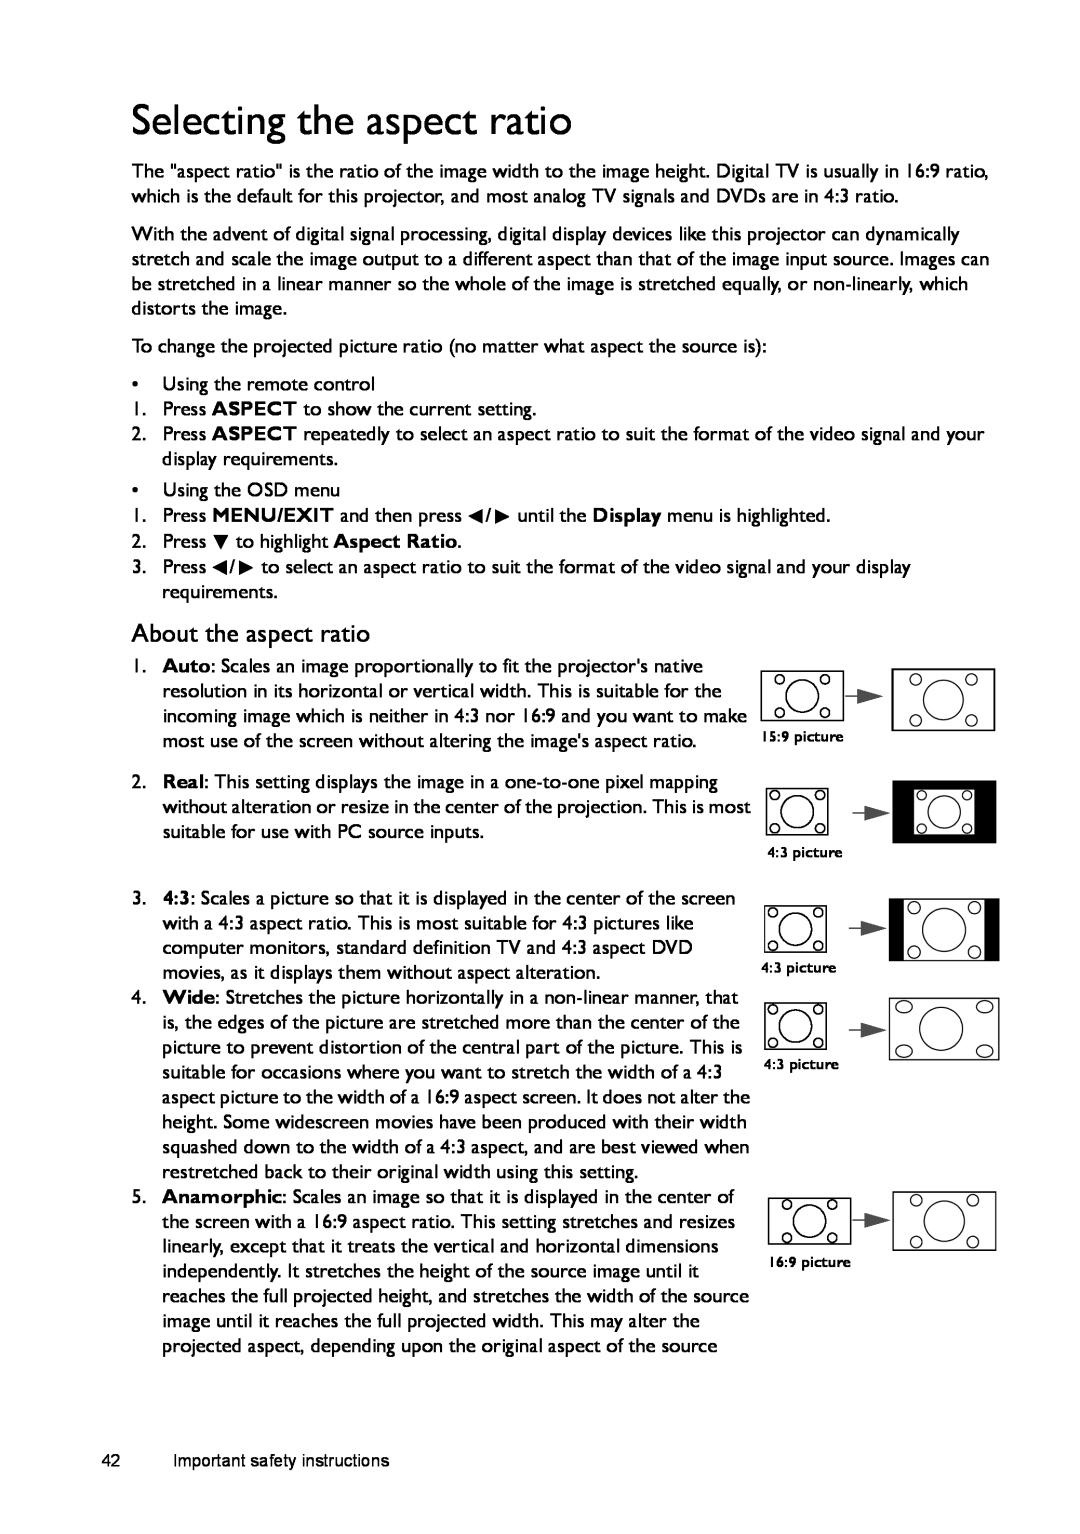 BenQ W1500 user manual Selecting the aspect ratio, About the aspect ratio 